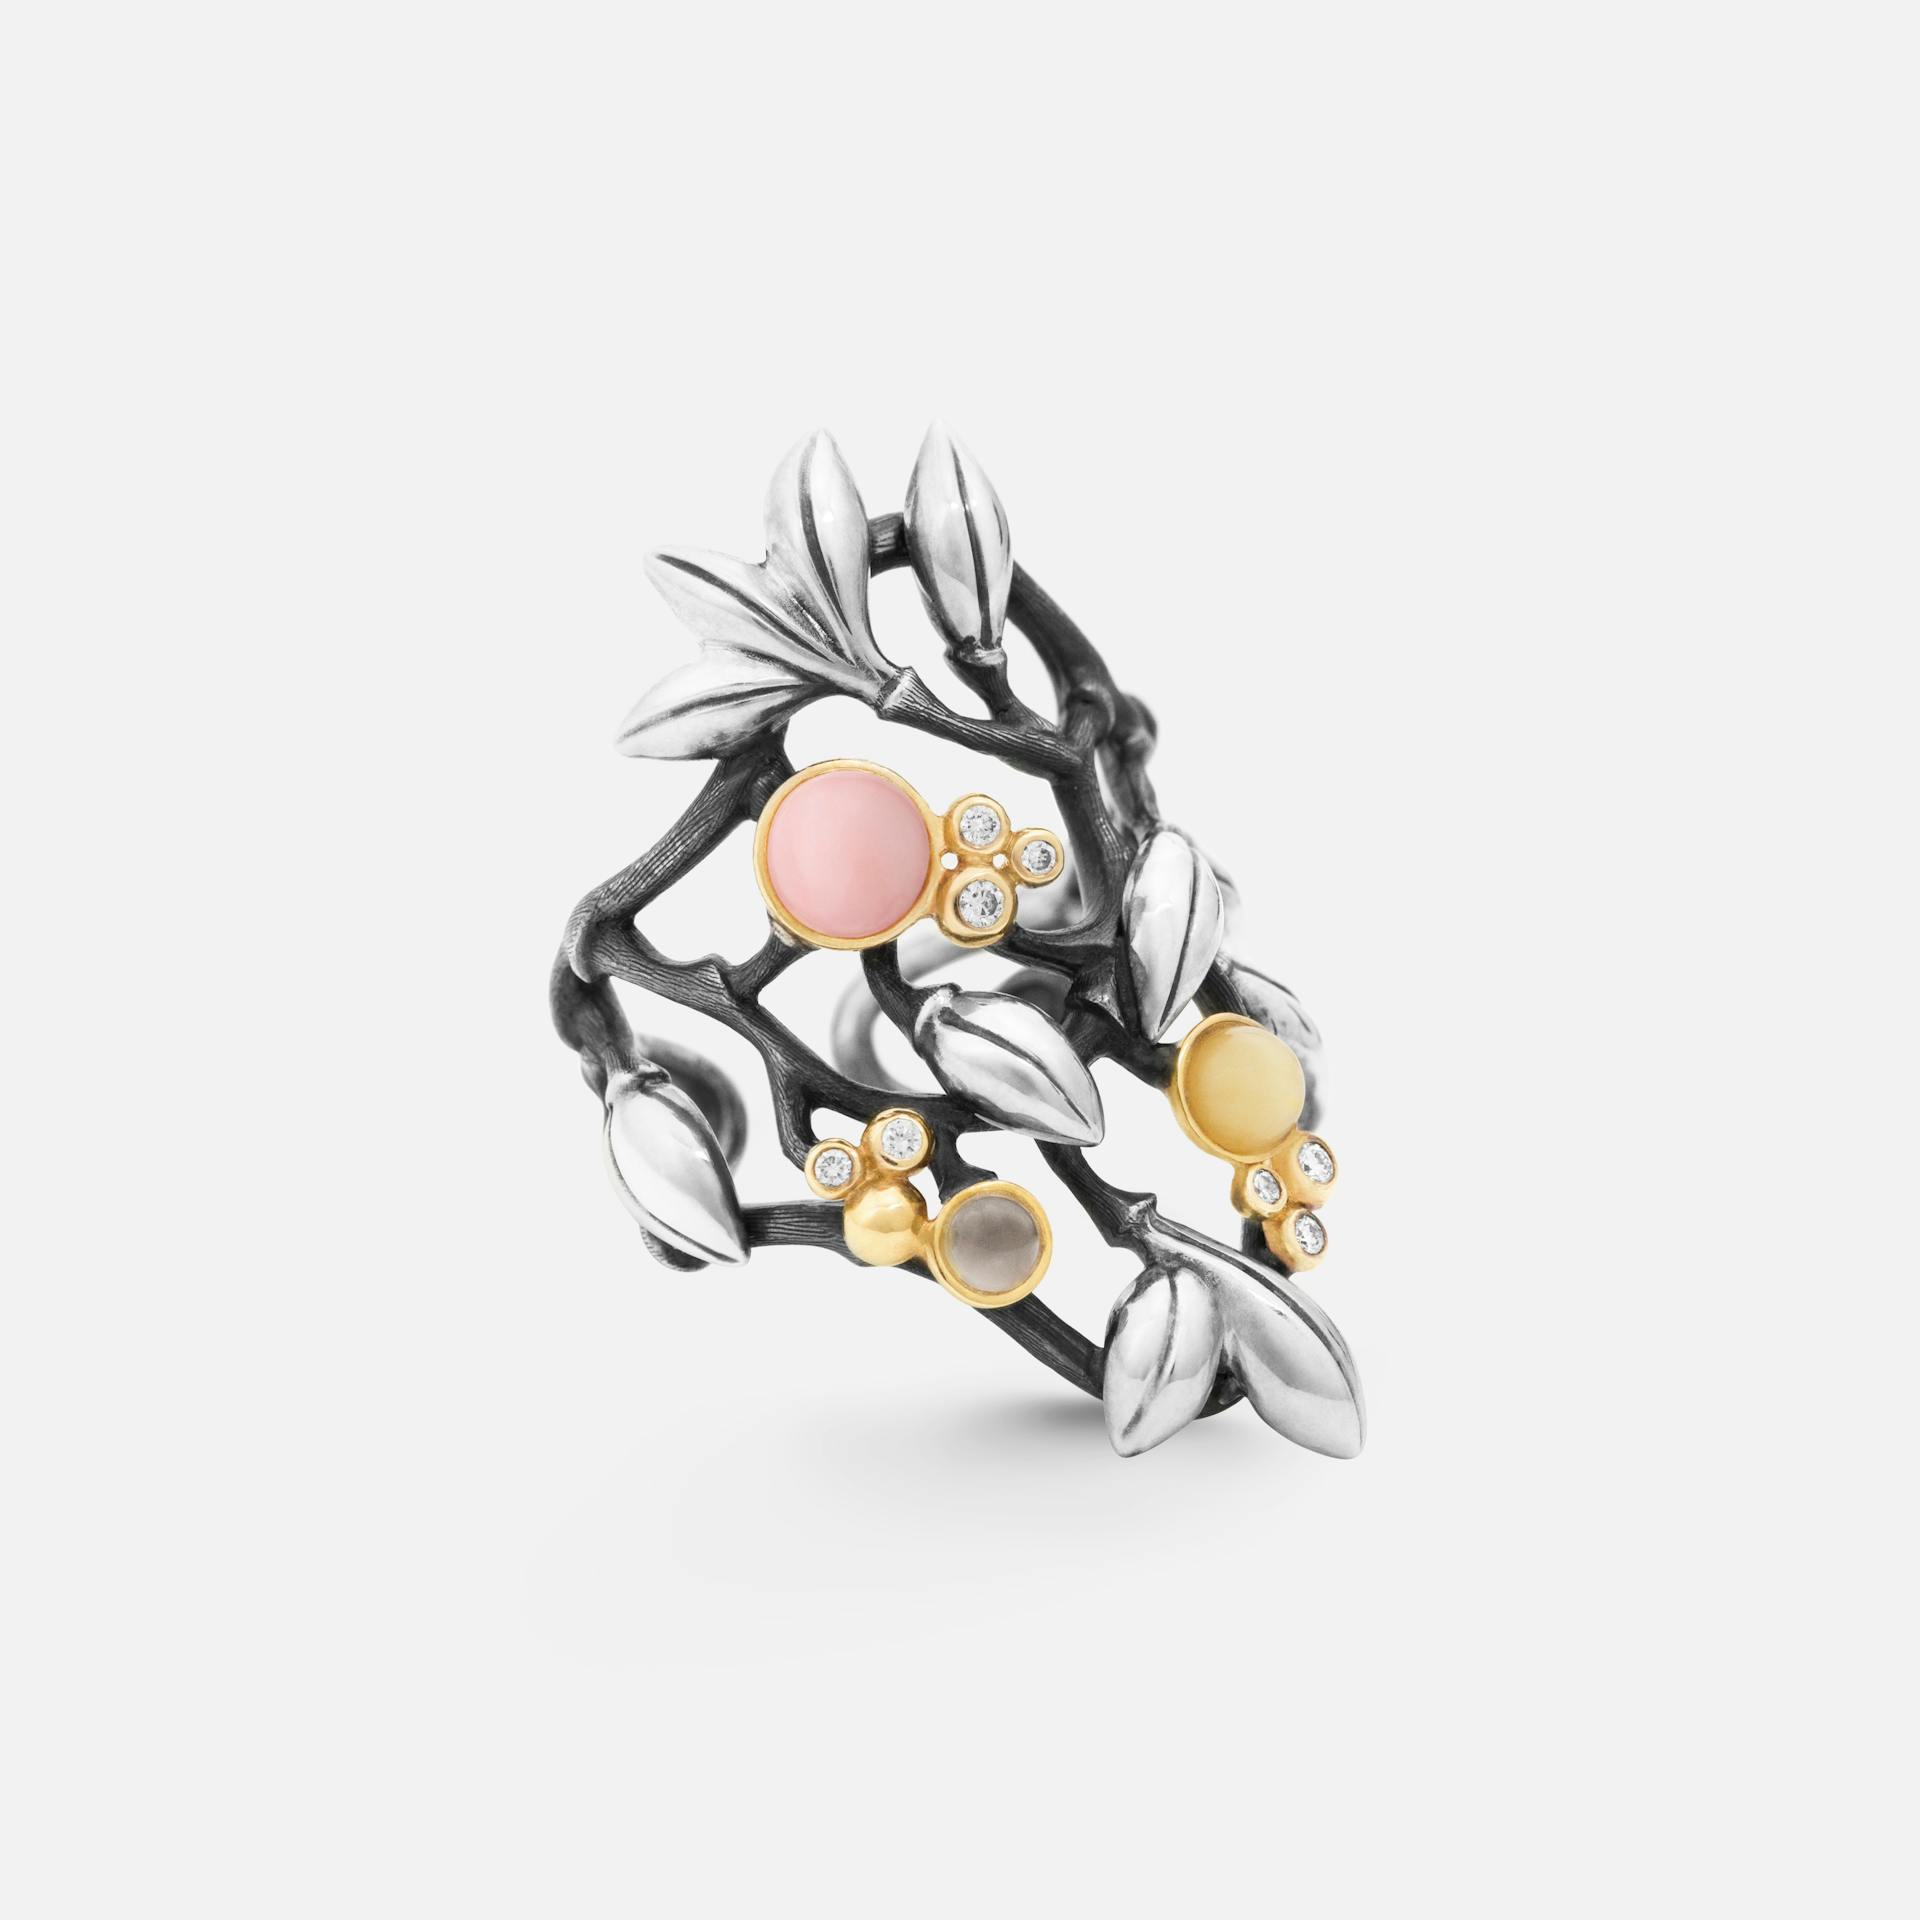 Forest Ring in Sterling Silver and Gold with Diamonds, Rose Opal, Amber, and Grey Moonstone